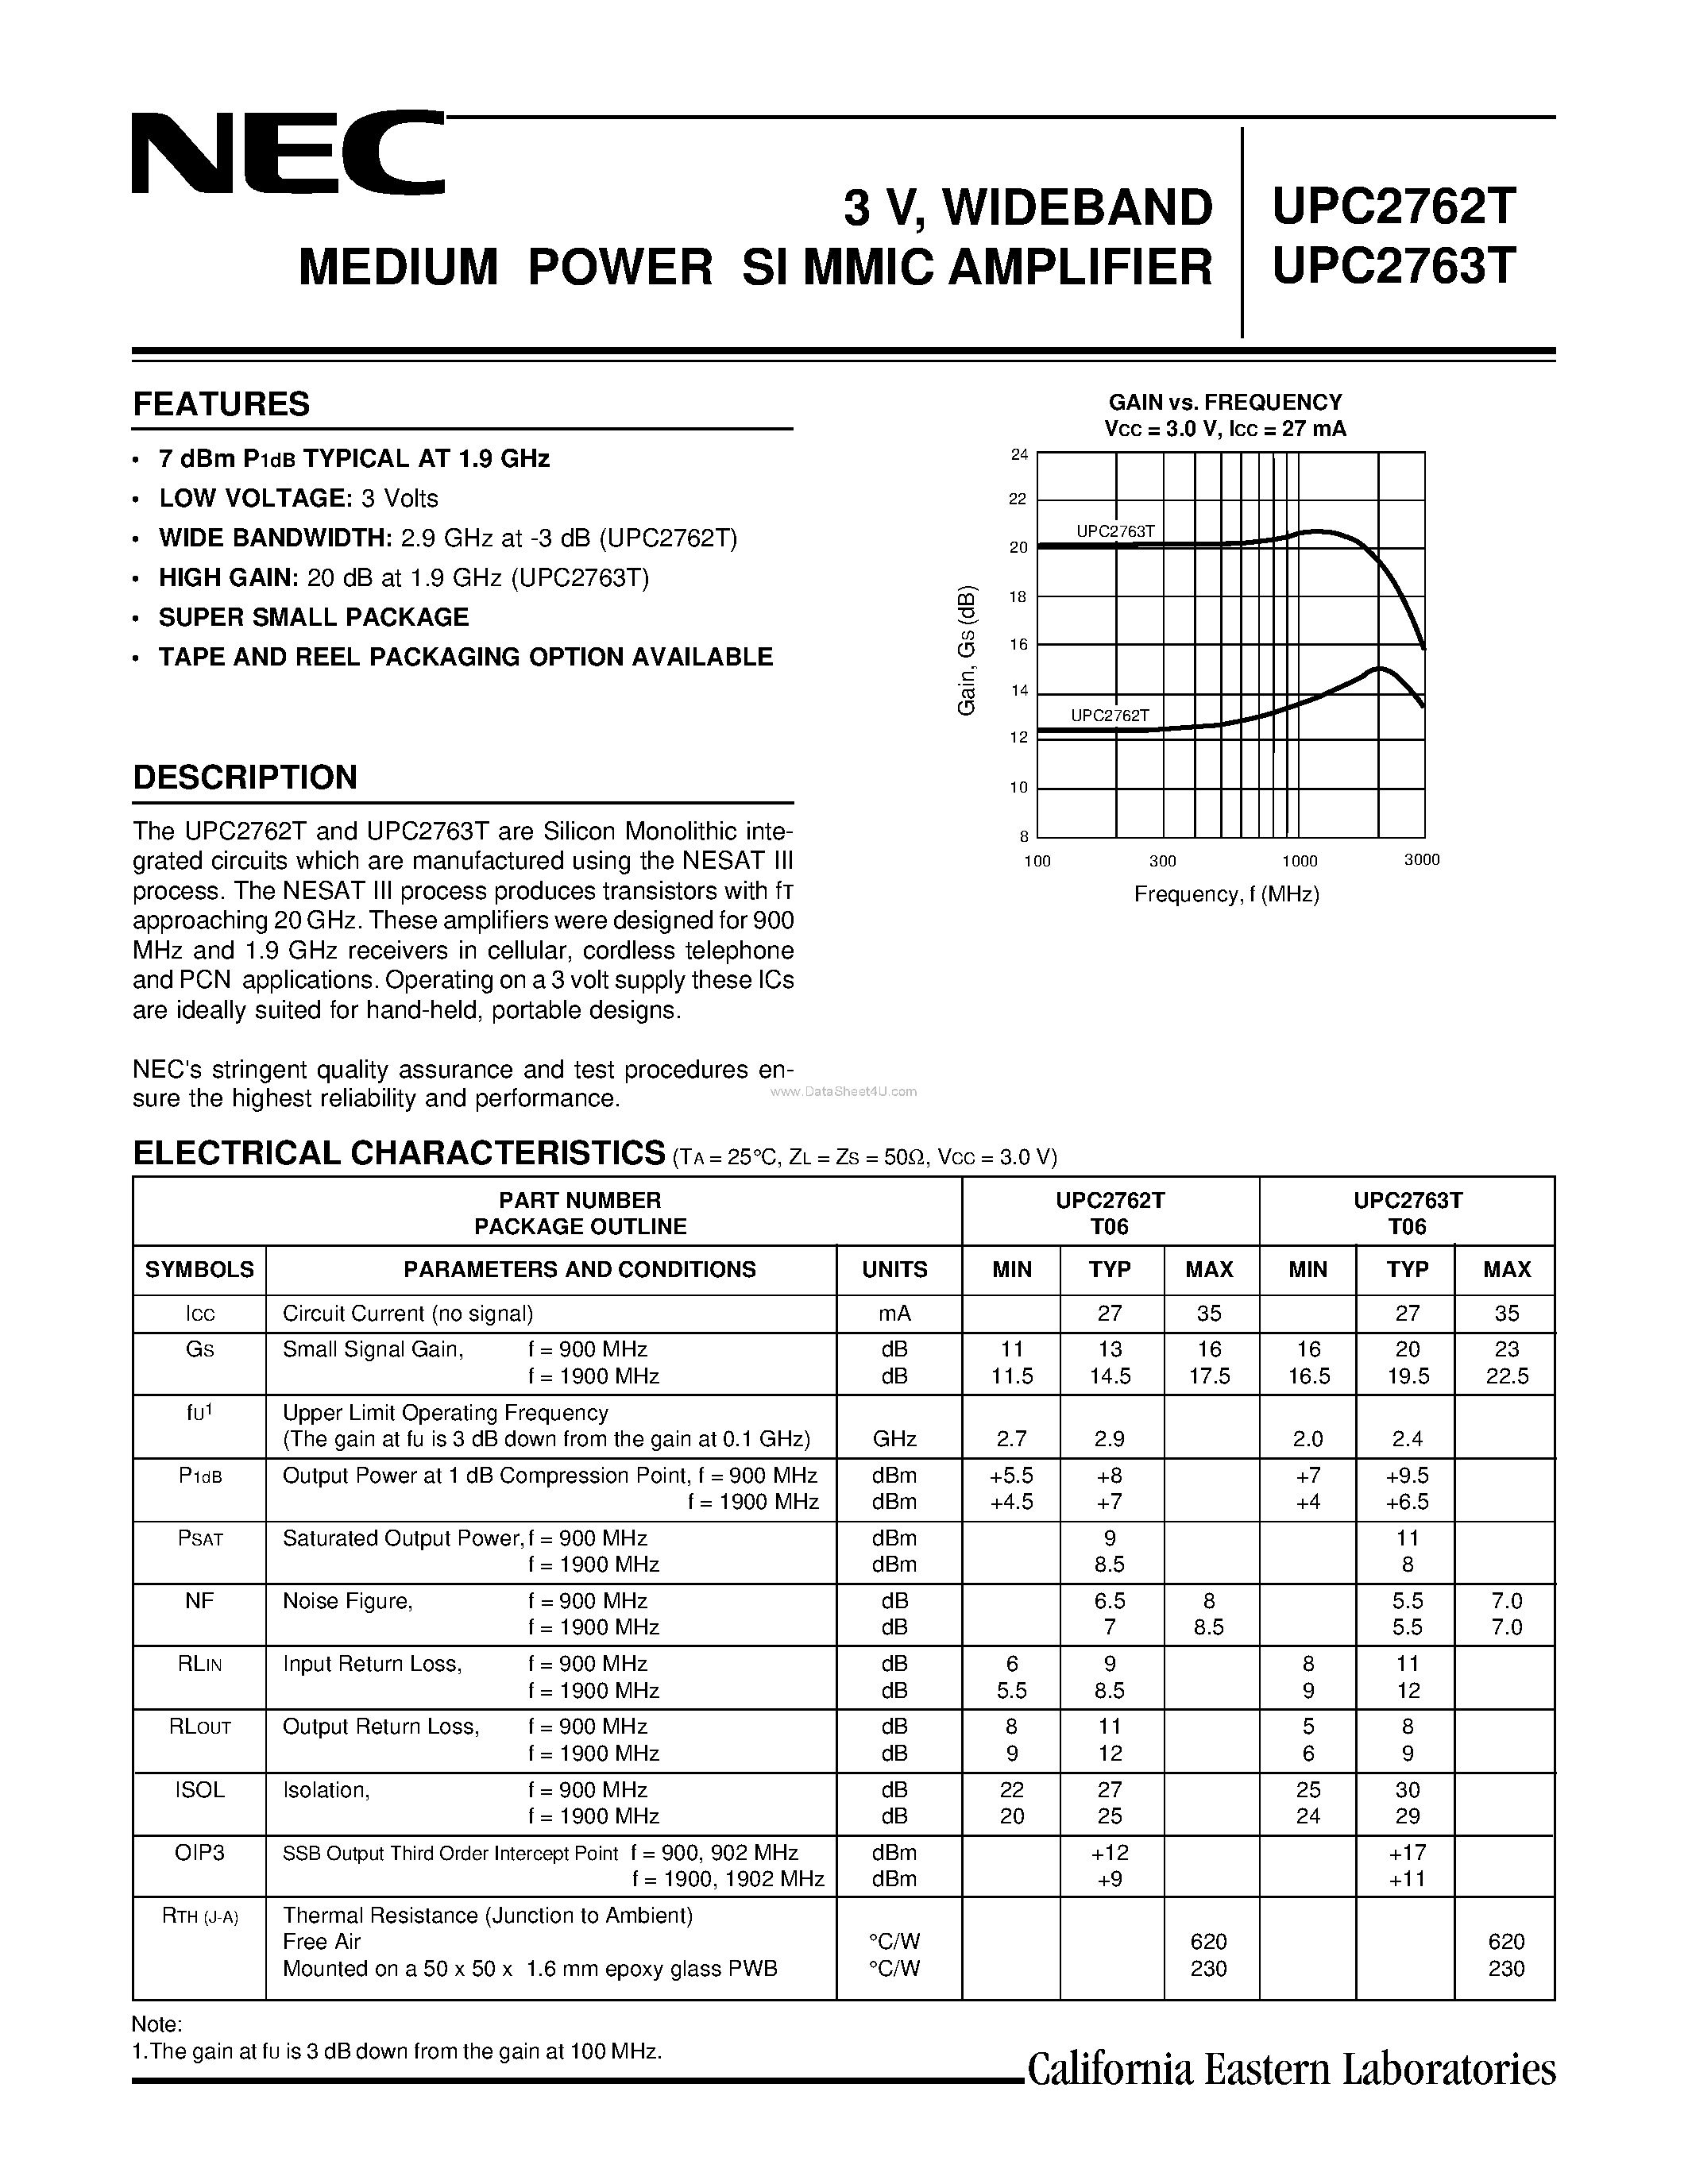 Datasheet UPC2763T - 3 V/ 2.9 GHz SILICON MMIC MEDIUM OUTPUT POWER AMPLIFIER FOR MOBILE COMMUNICATIONS page 1